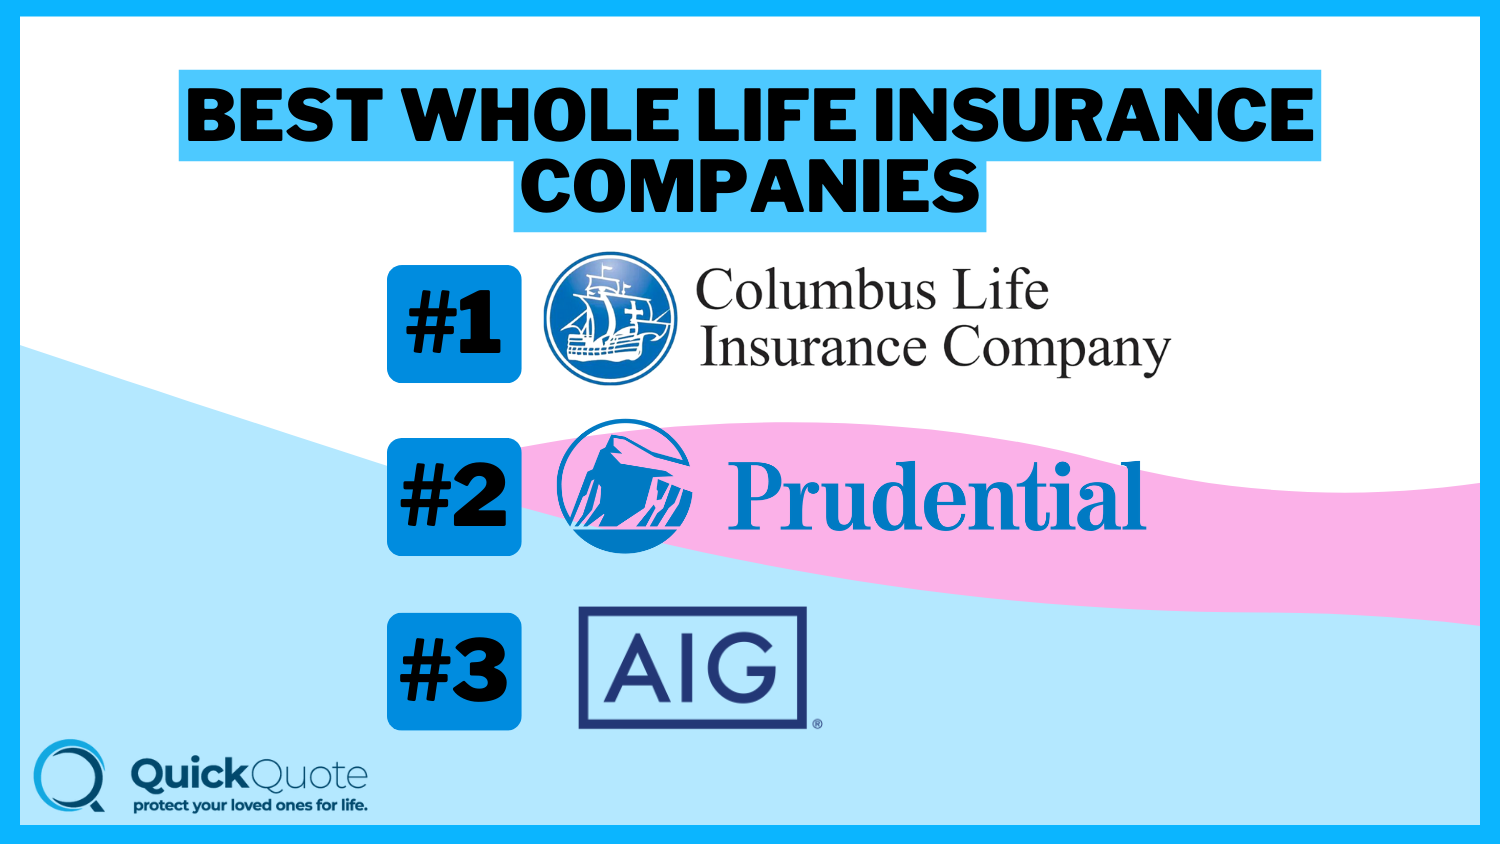 Best Whole Life Insurance Companies: Columbus, Prudential, AIG